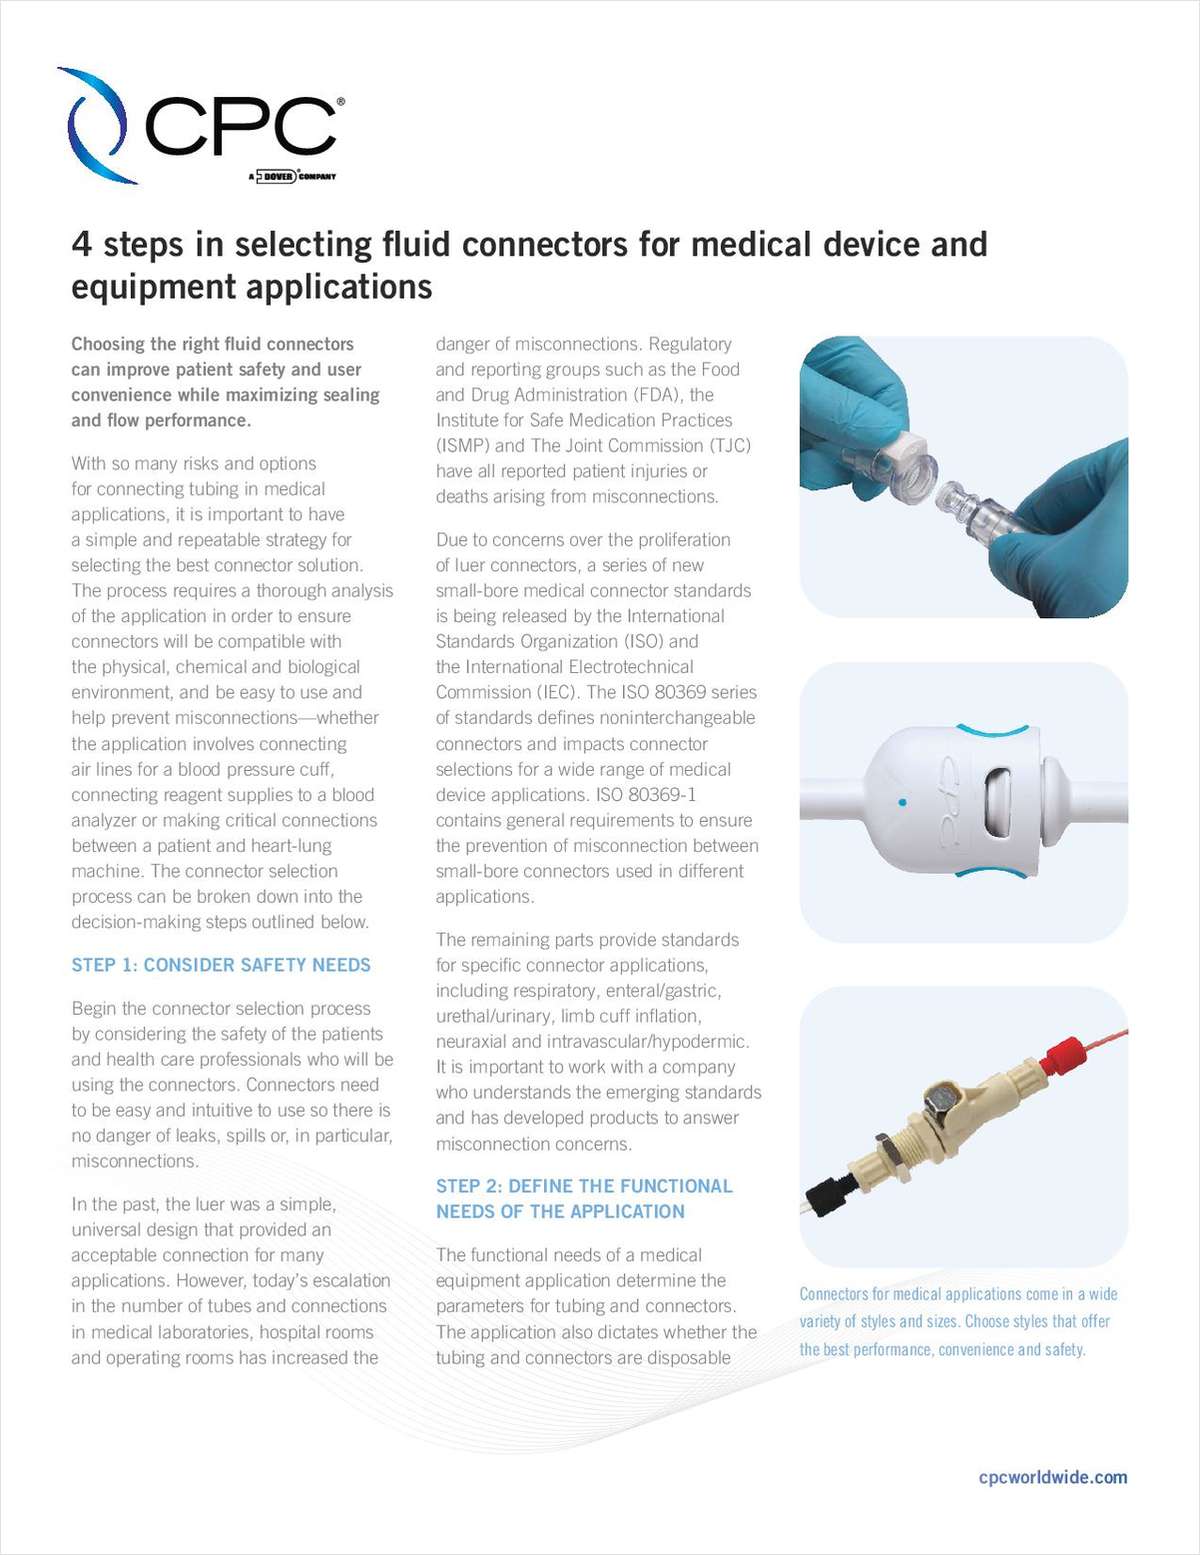 4 Steps in Selecting Fluid Connectors for Medical Devices and Equipment